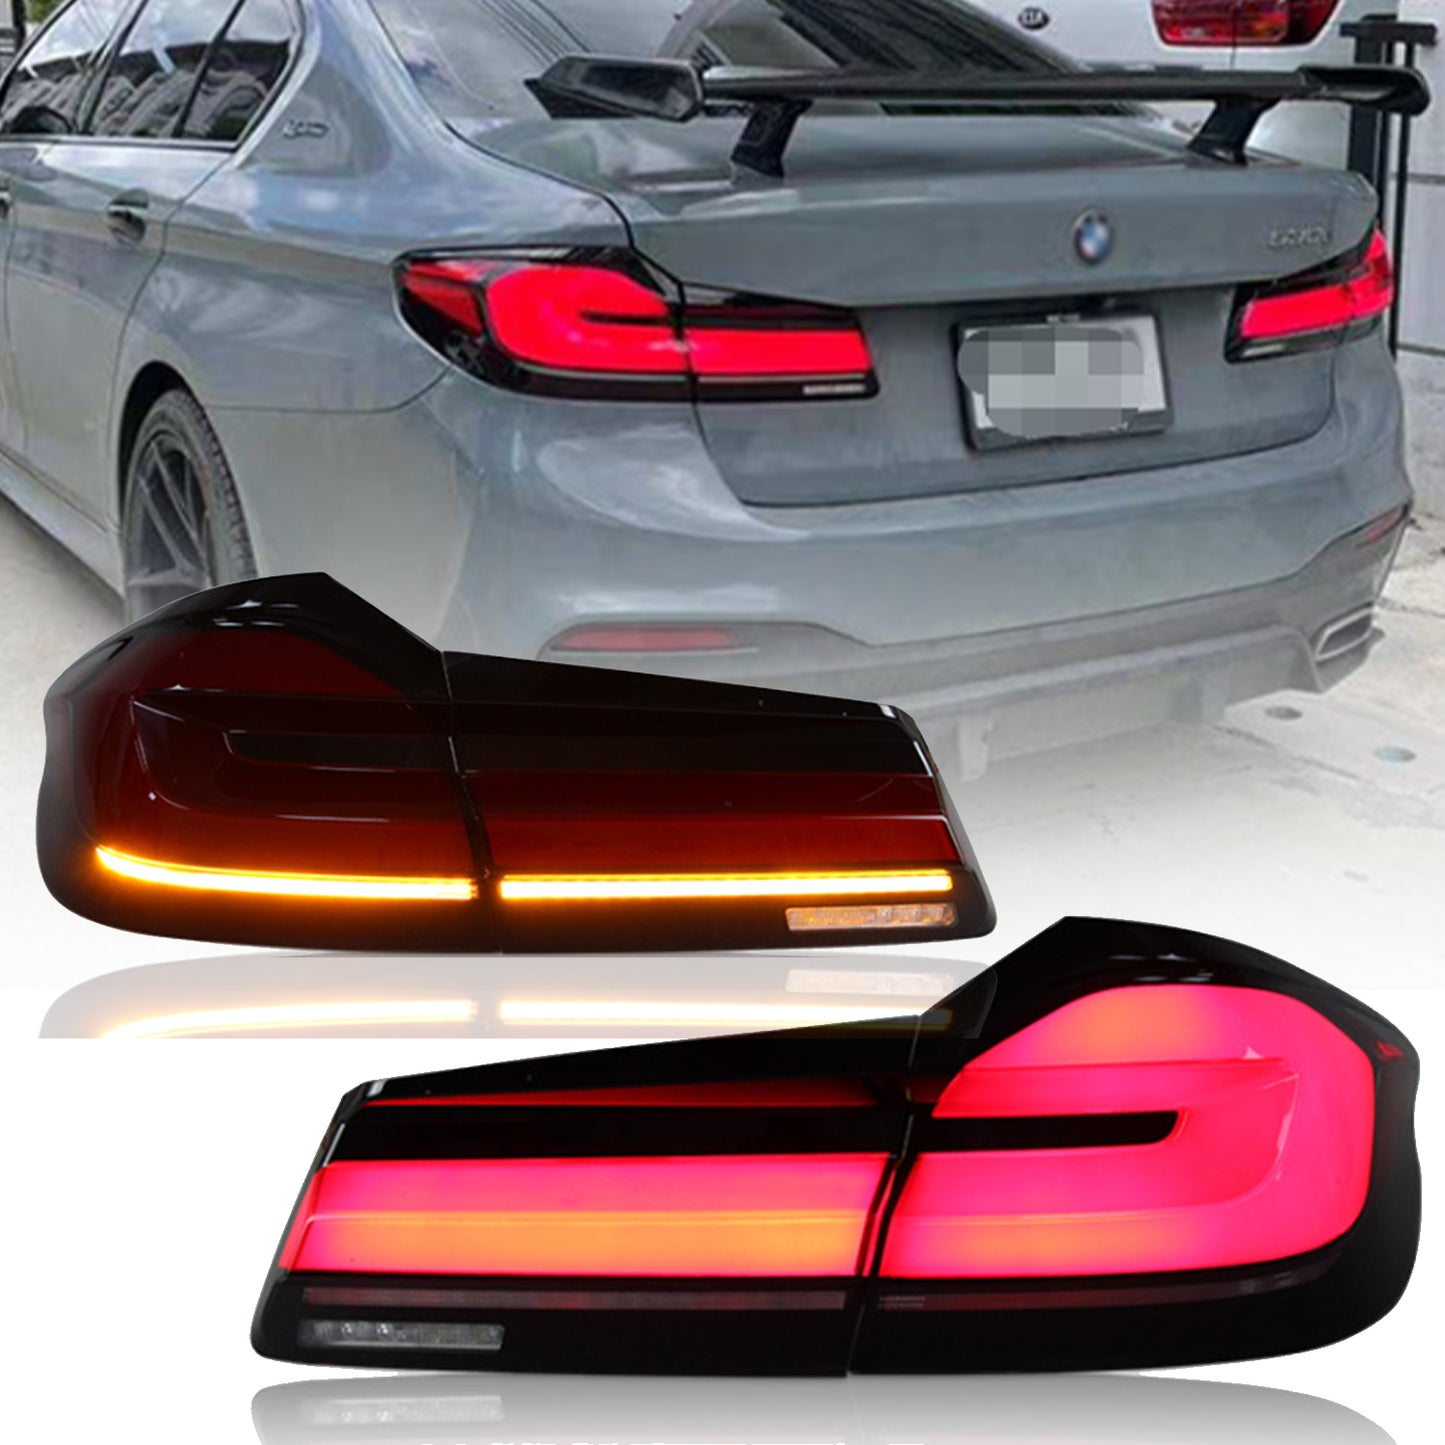 Full LED Tail Lights Assembly For BMW 5 series G30 G38 2017-2022,old to new styles